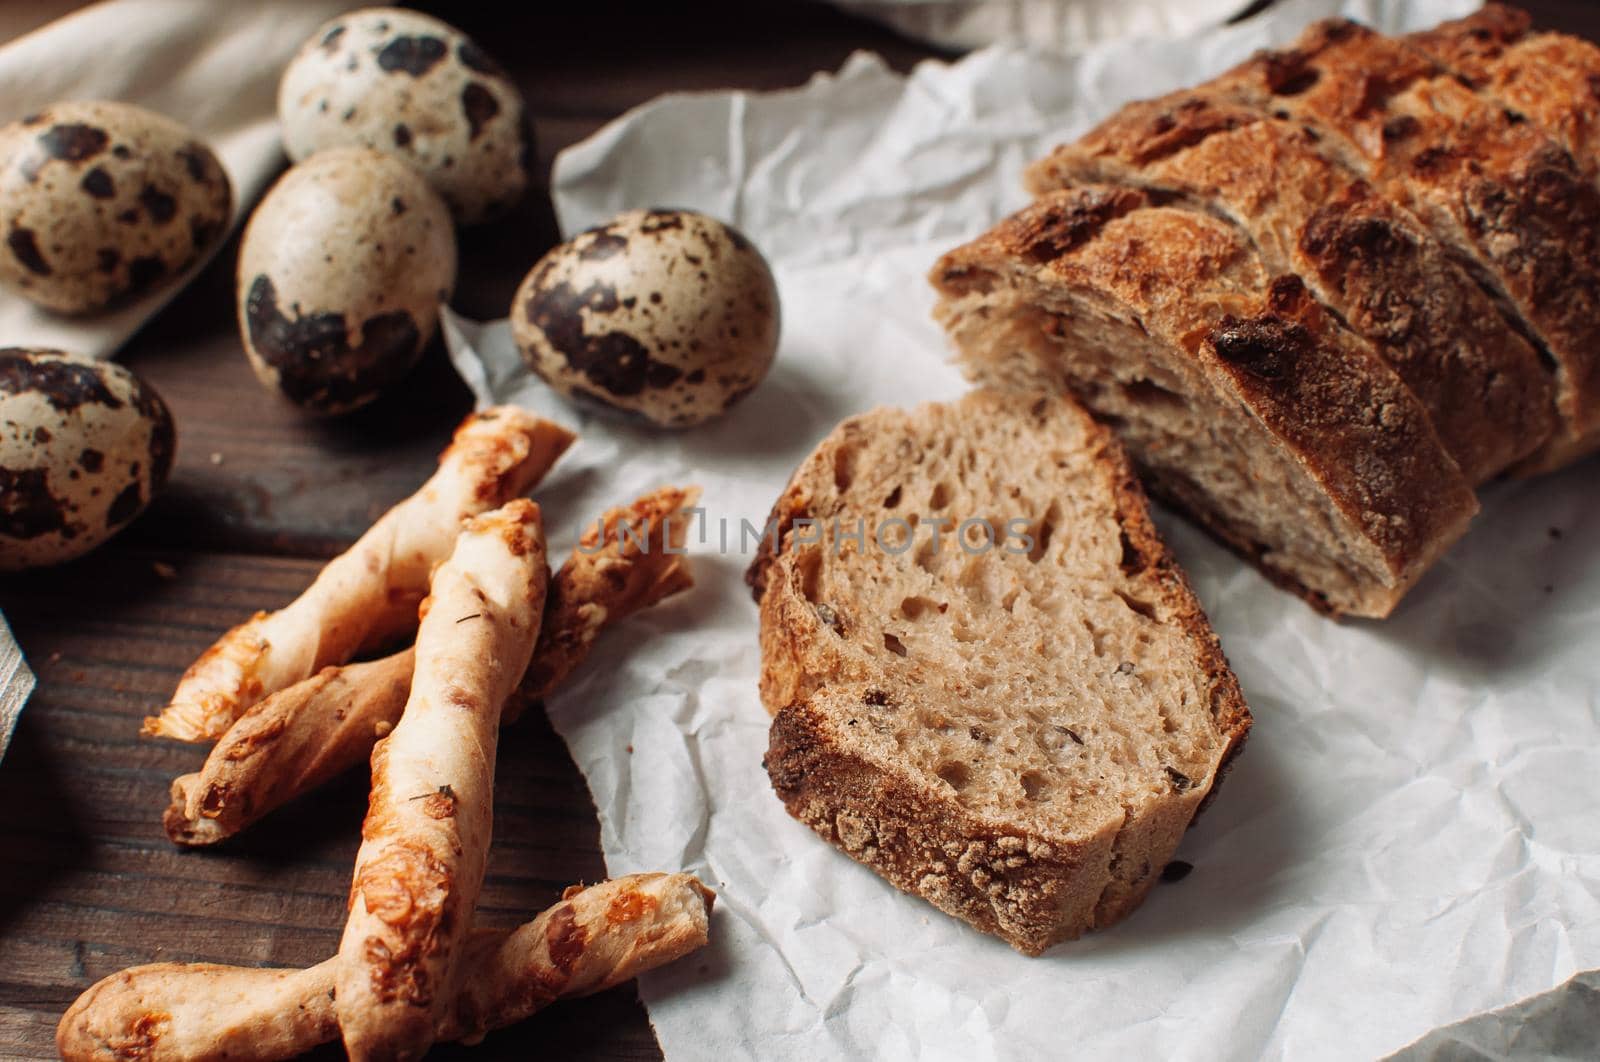 set dark yeast free buckwheat bread in a cut lies on parchment, next to quail eggs and Italian grissini. The concept of preparing breakfast.